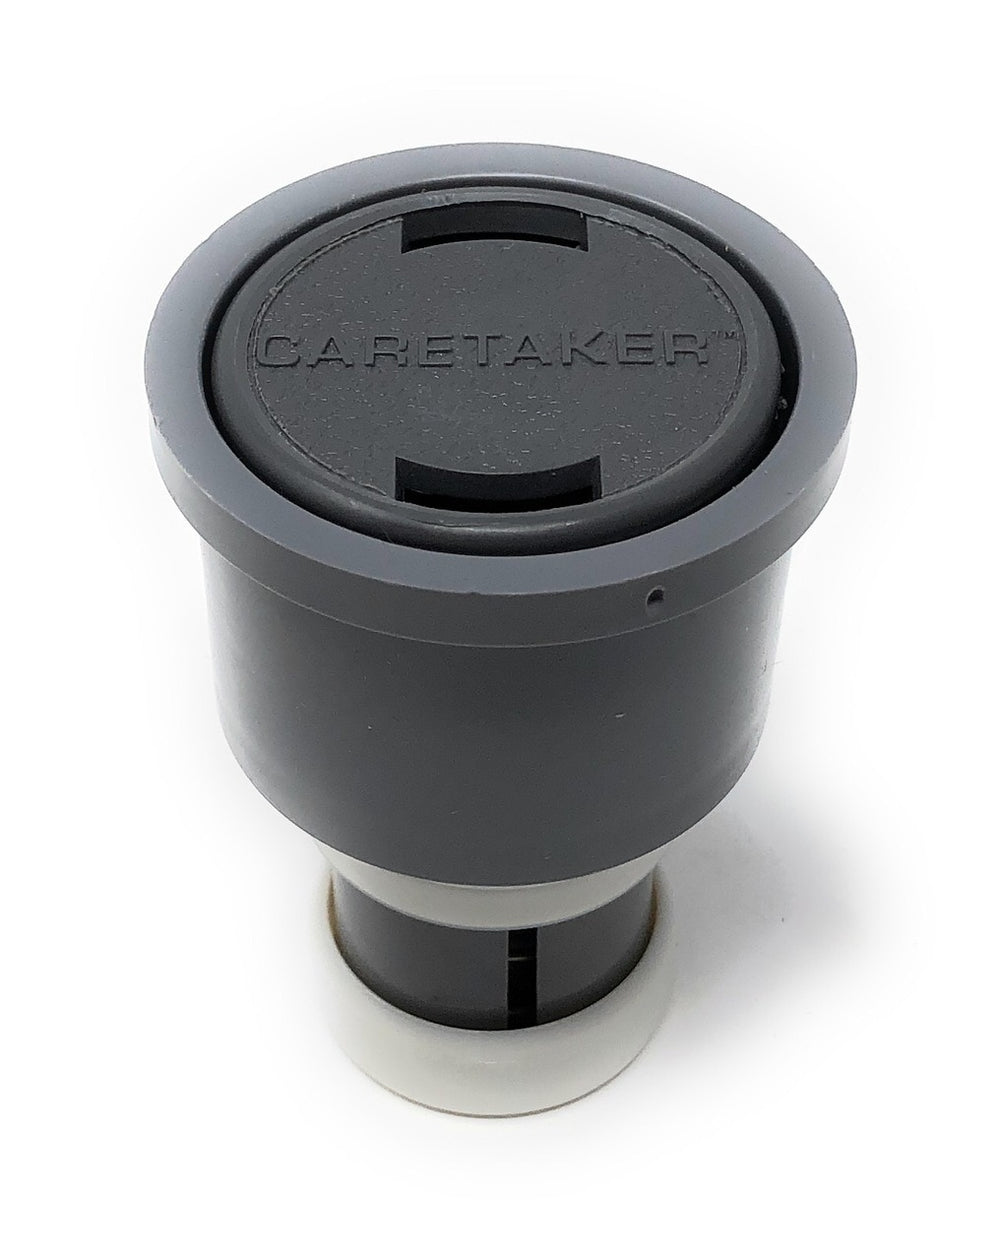 Caretaker 99 Complete 2" Cleaning Head (Light Gray) - Fully Assembled